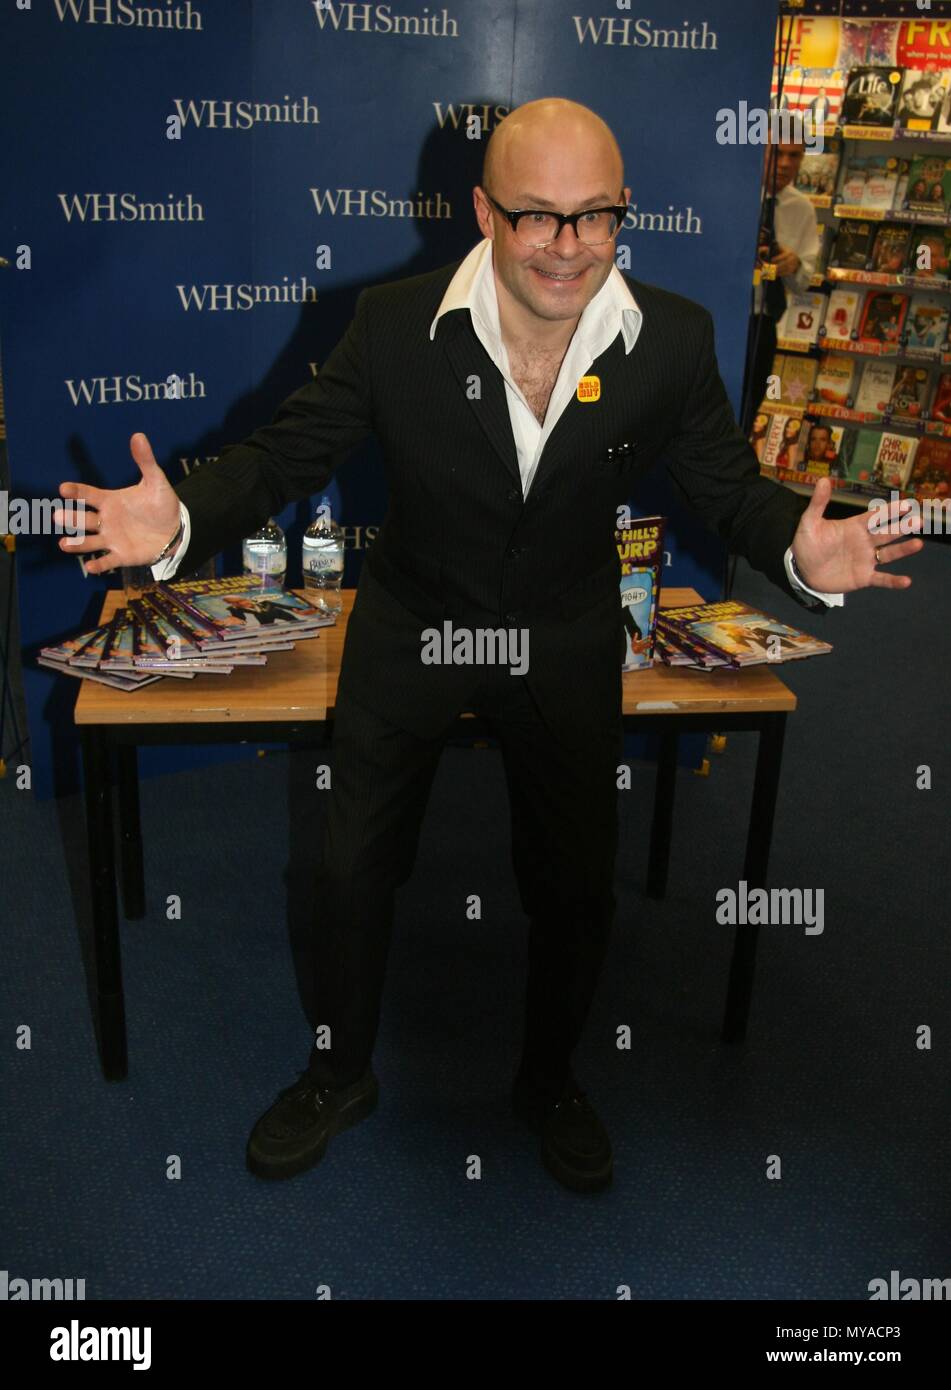 Manchester,Uk, Harry Hill signs copies of his autobiography in whsmith credit Ian Fairbrother/Alamy Stock Photos Stock Photo